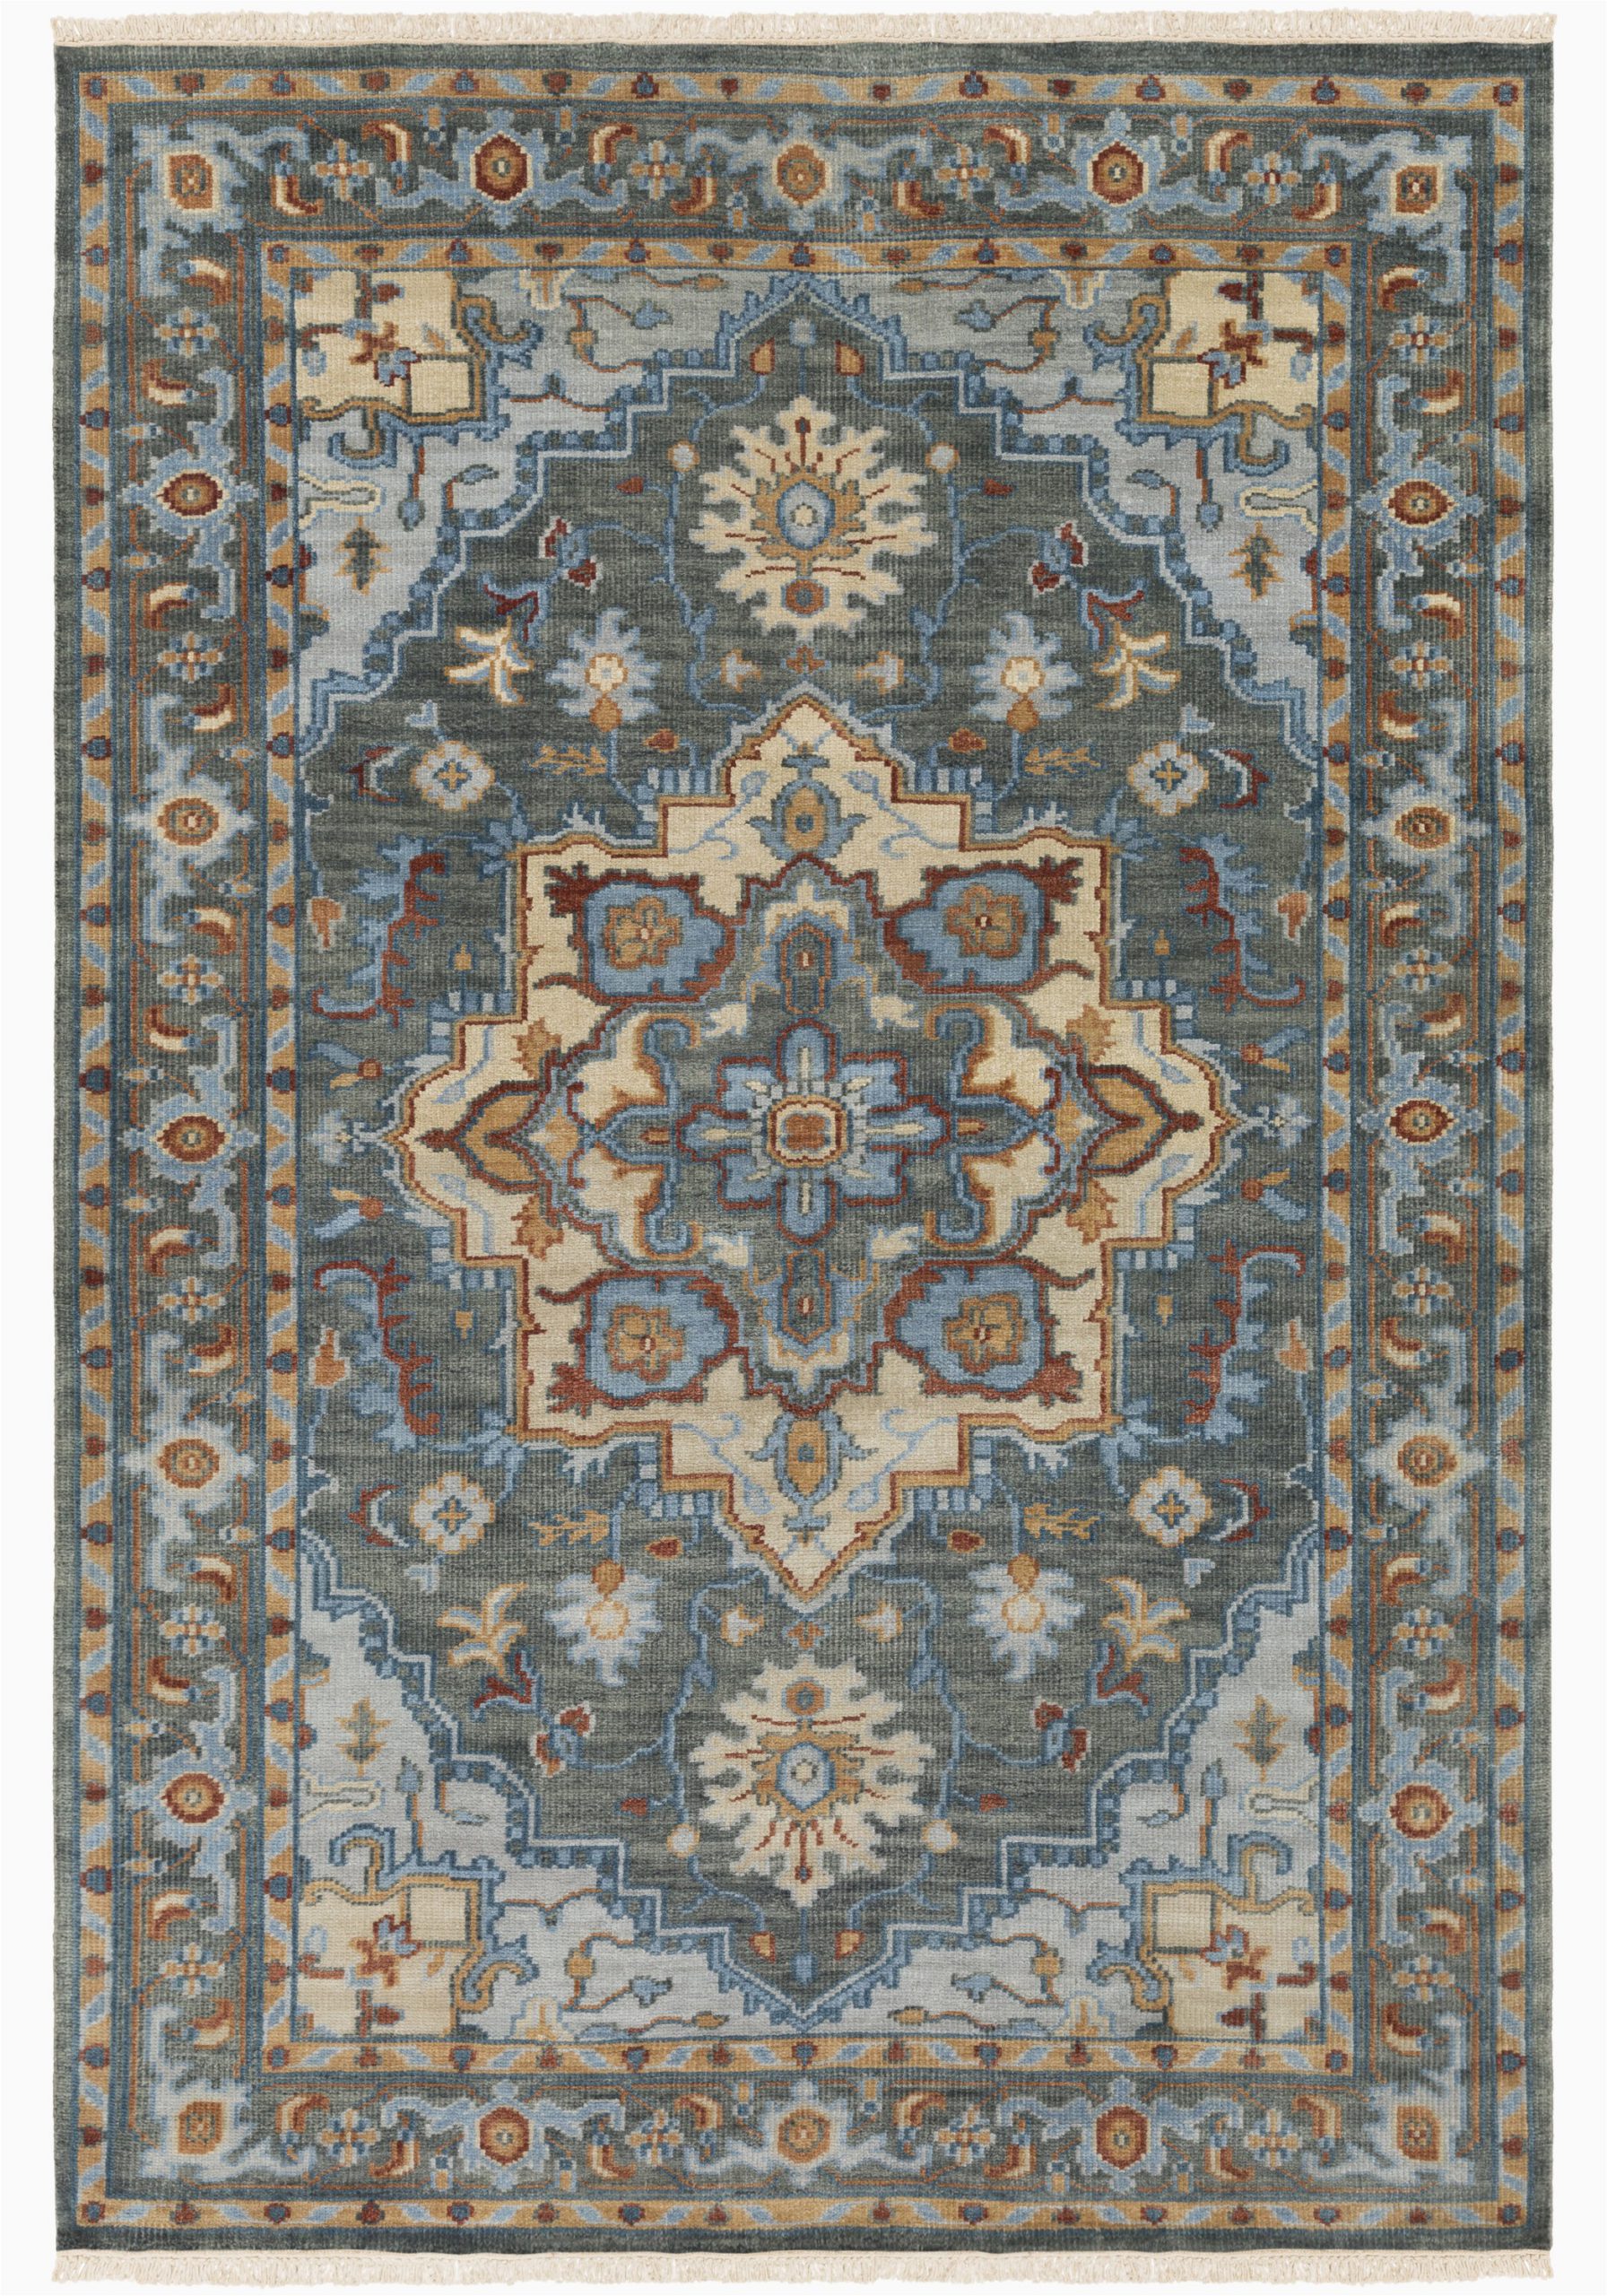 Blue Hand Knotted Wool Rug Carlisle Hand Knotted Wool Dark Green Bright Blue area Rug